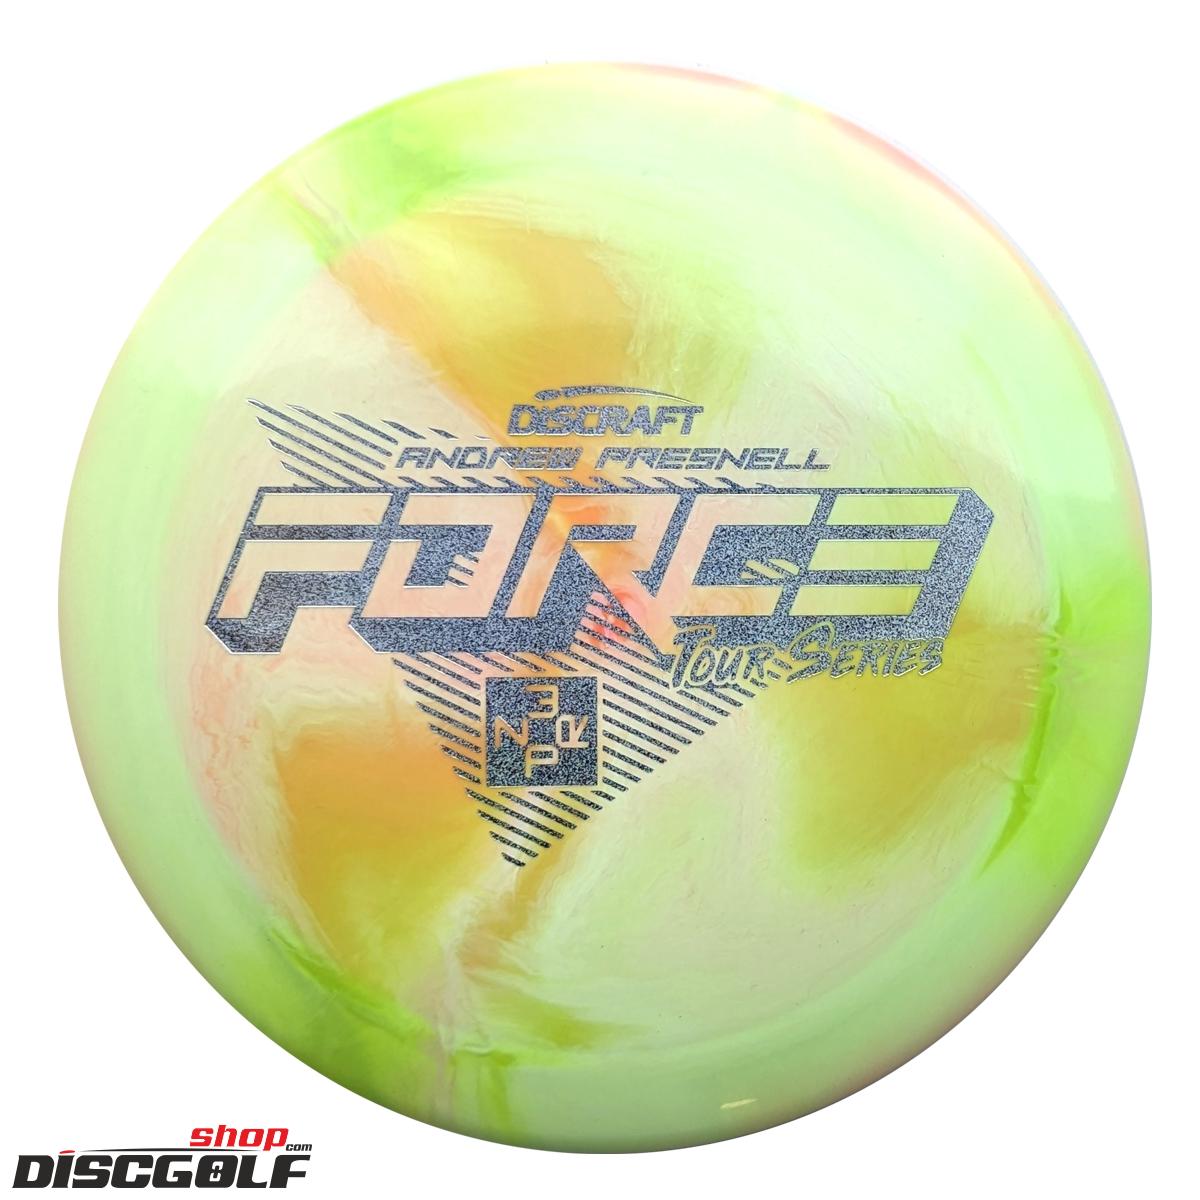 Discraft Force ESP Swirl Andrew Presnell Tour Series 2022 (discgolf)